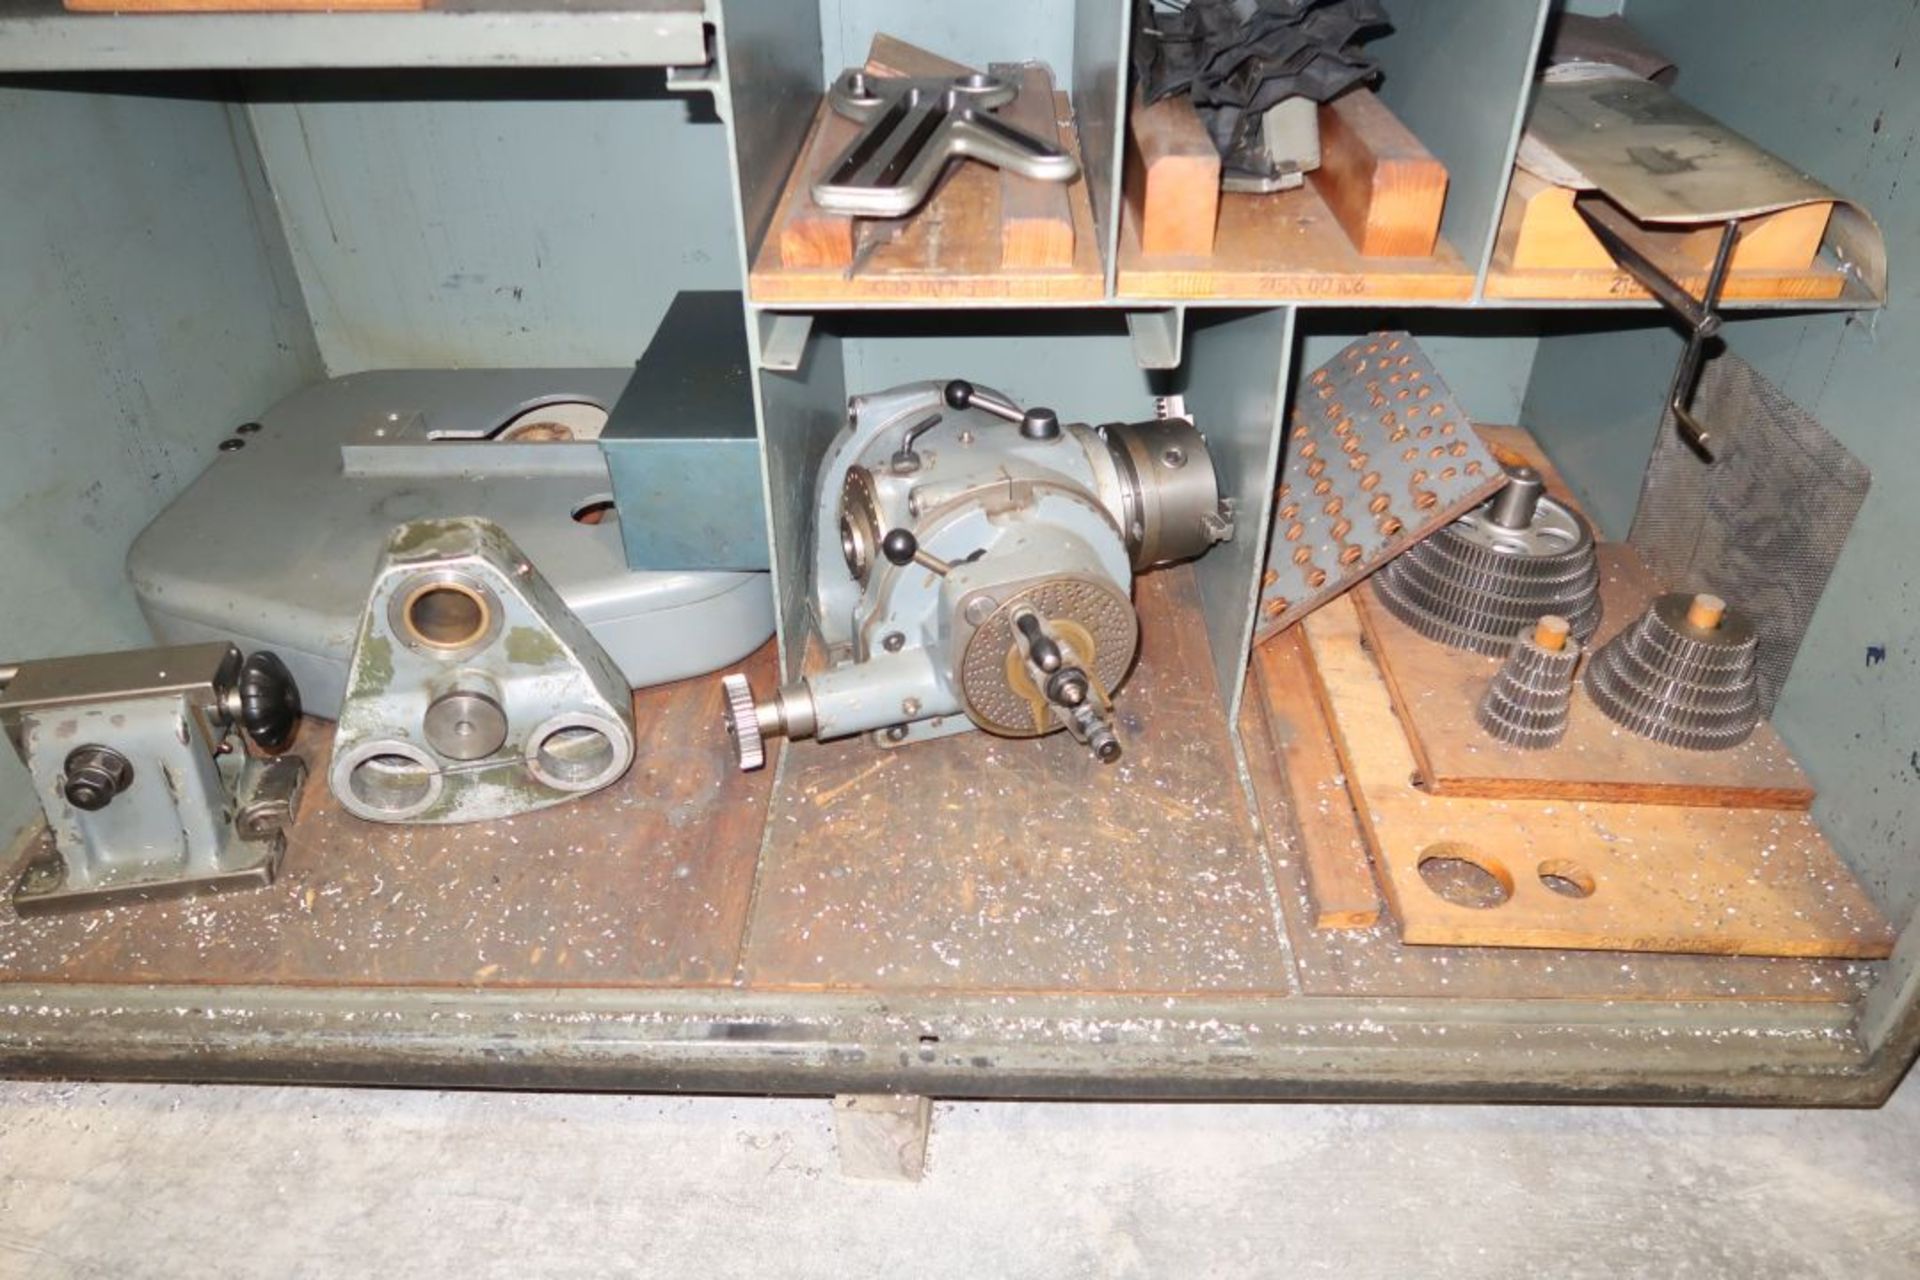 SHAUBLIN MOD: 53 UNIVERSAL HORIZONTAL MILLING MACHINE W/ CUTTING TOOLS, COLLETS, HOLDERS, INDEXING - Image 6 of 6